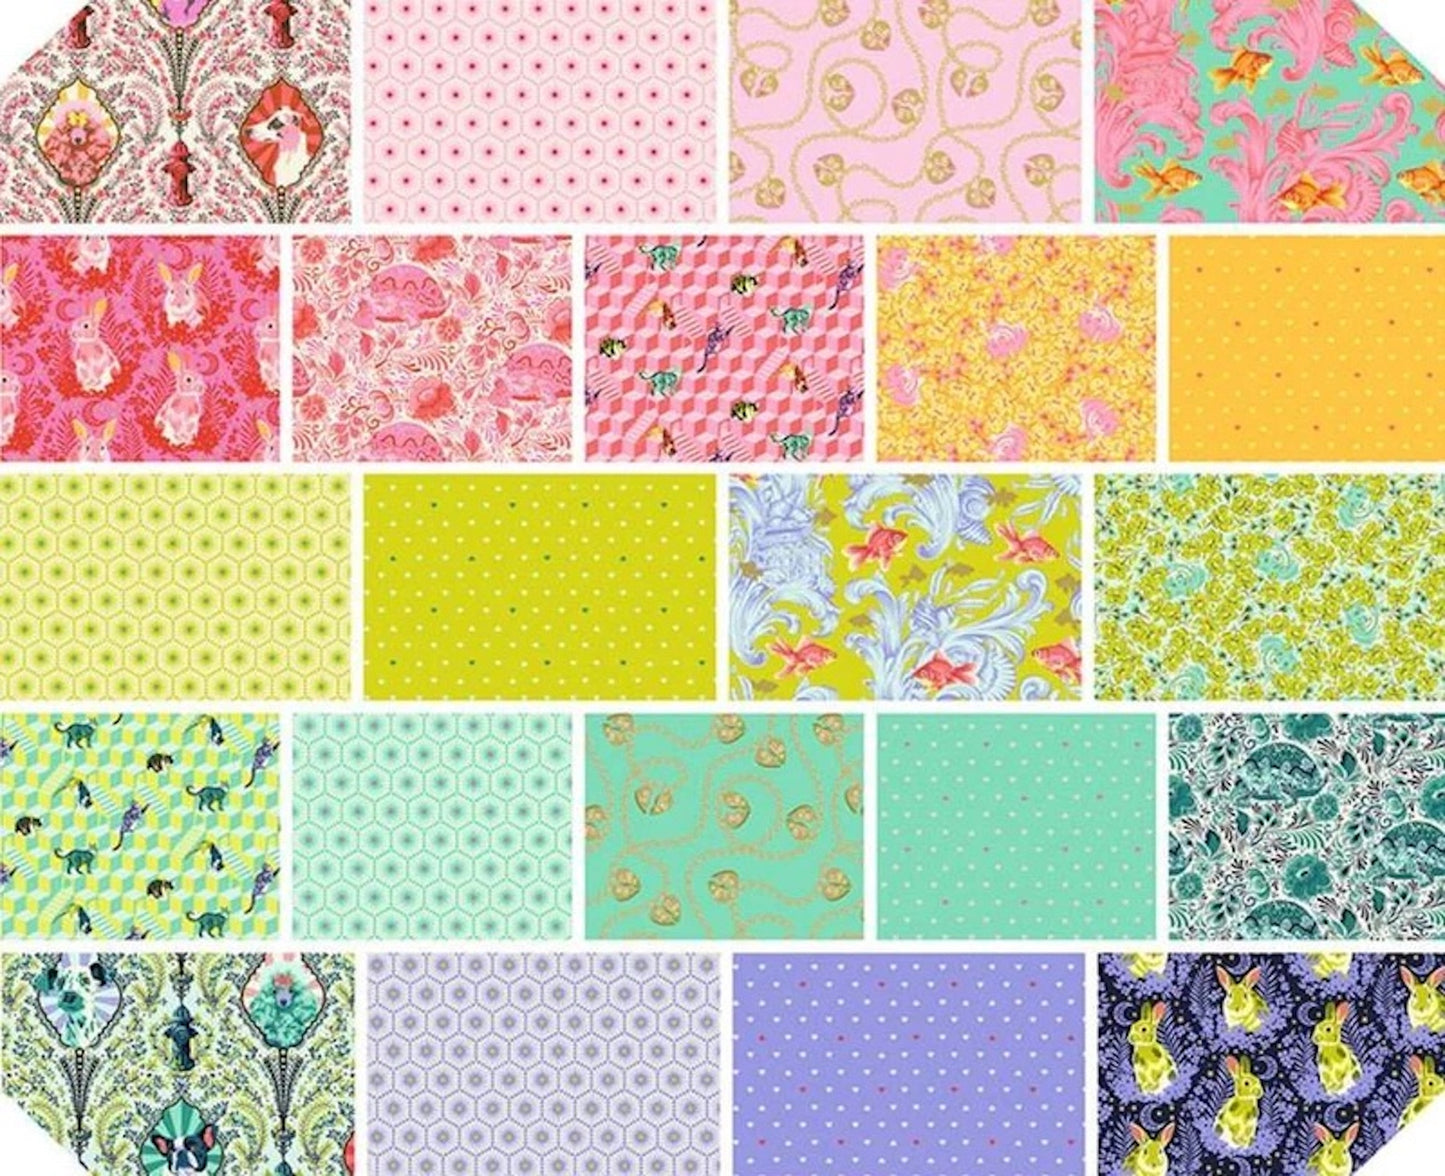 Besties 40 Piece Design Roll By Tula Pink